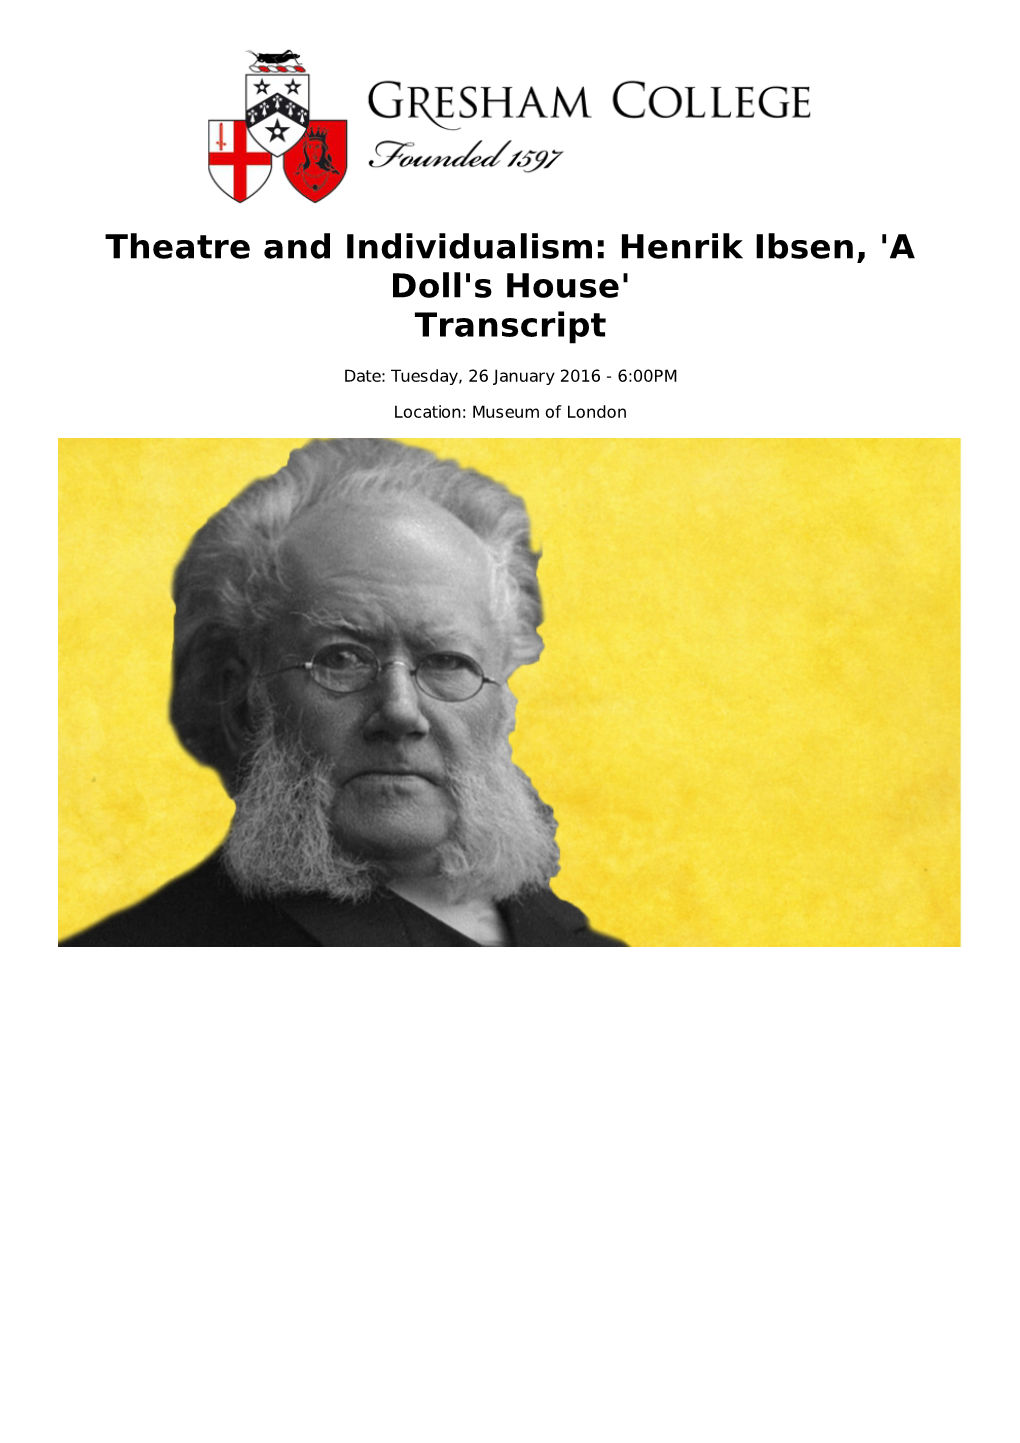 Theatre and Individualism: Henrik Ibsen, 'A Doll's House' Transcript